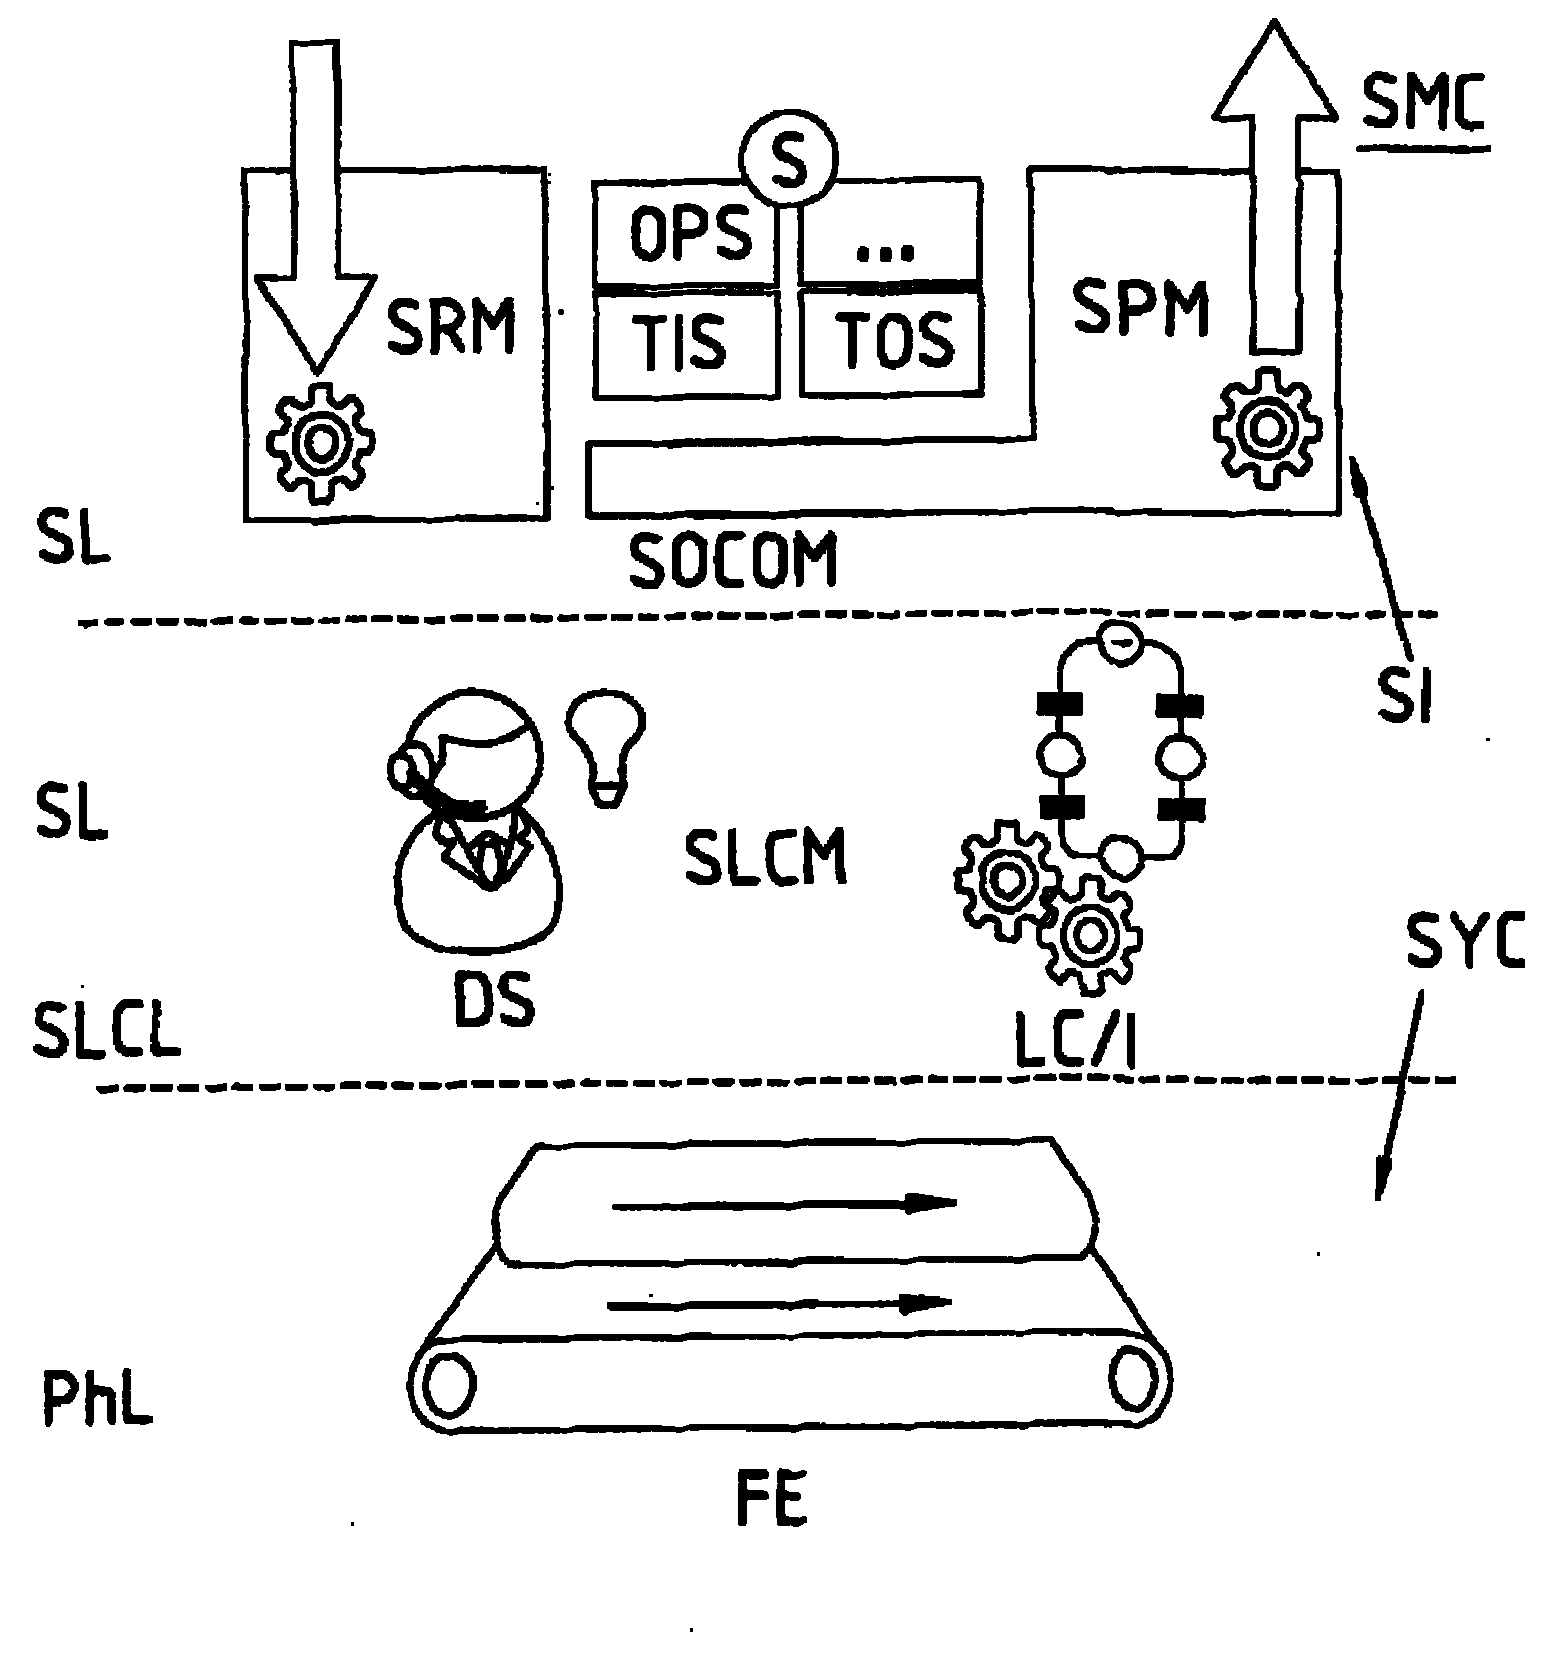 Method for orchestrating services of a service-oriented automation system and orchestration machine